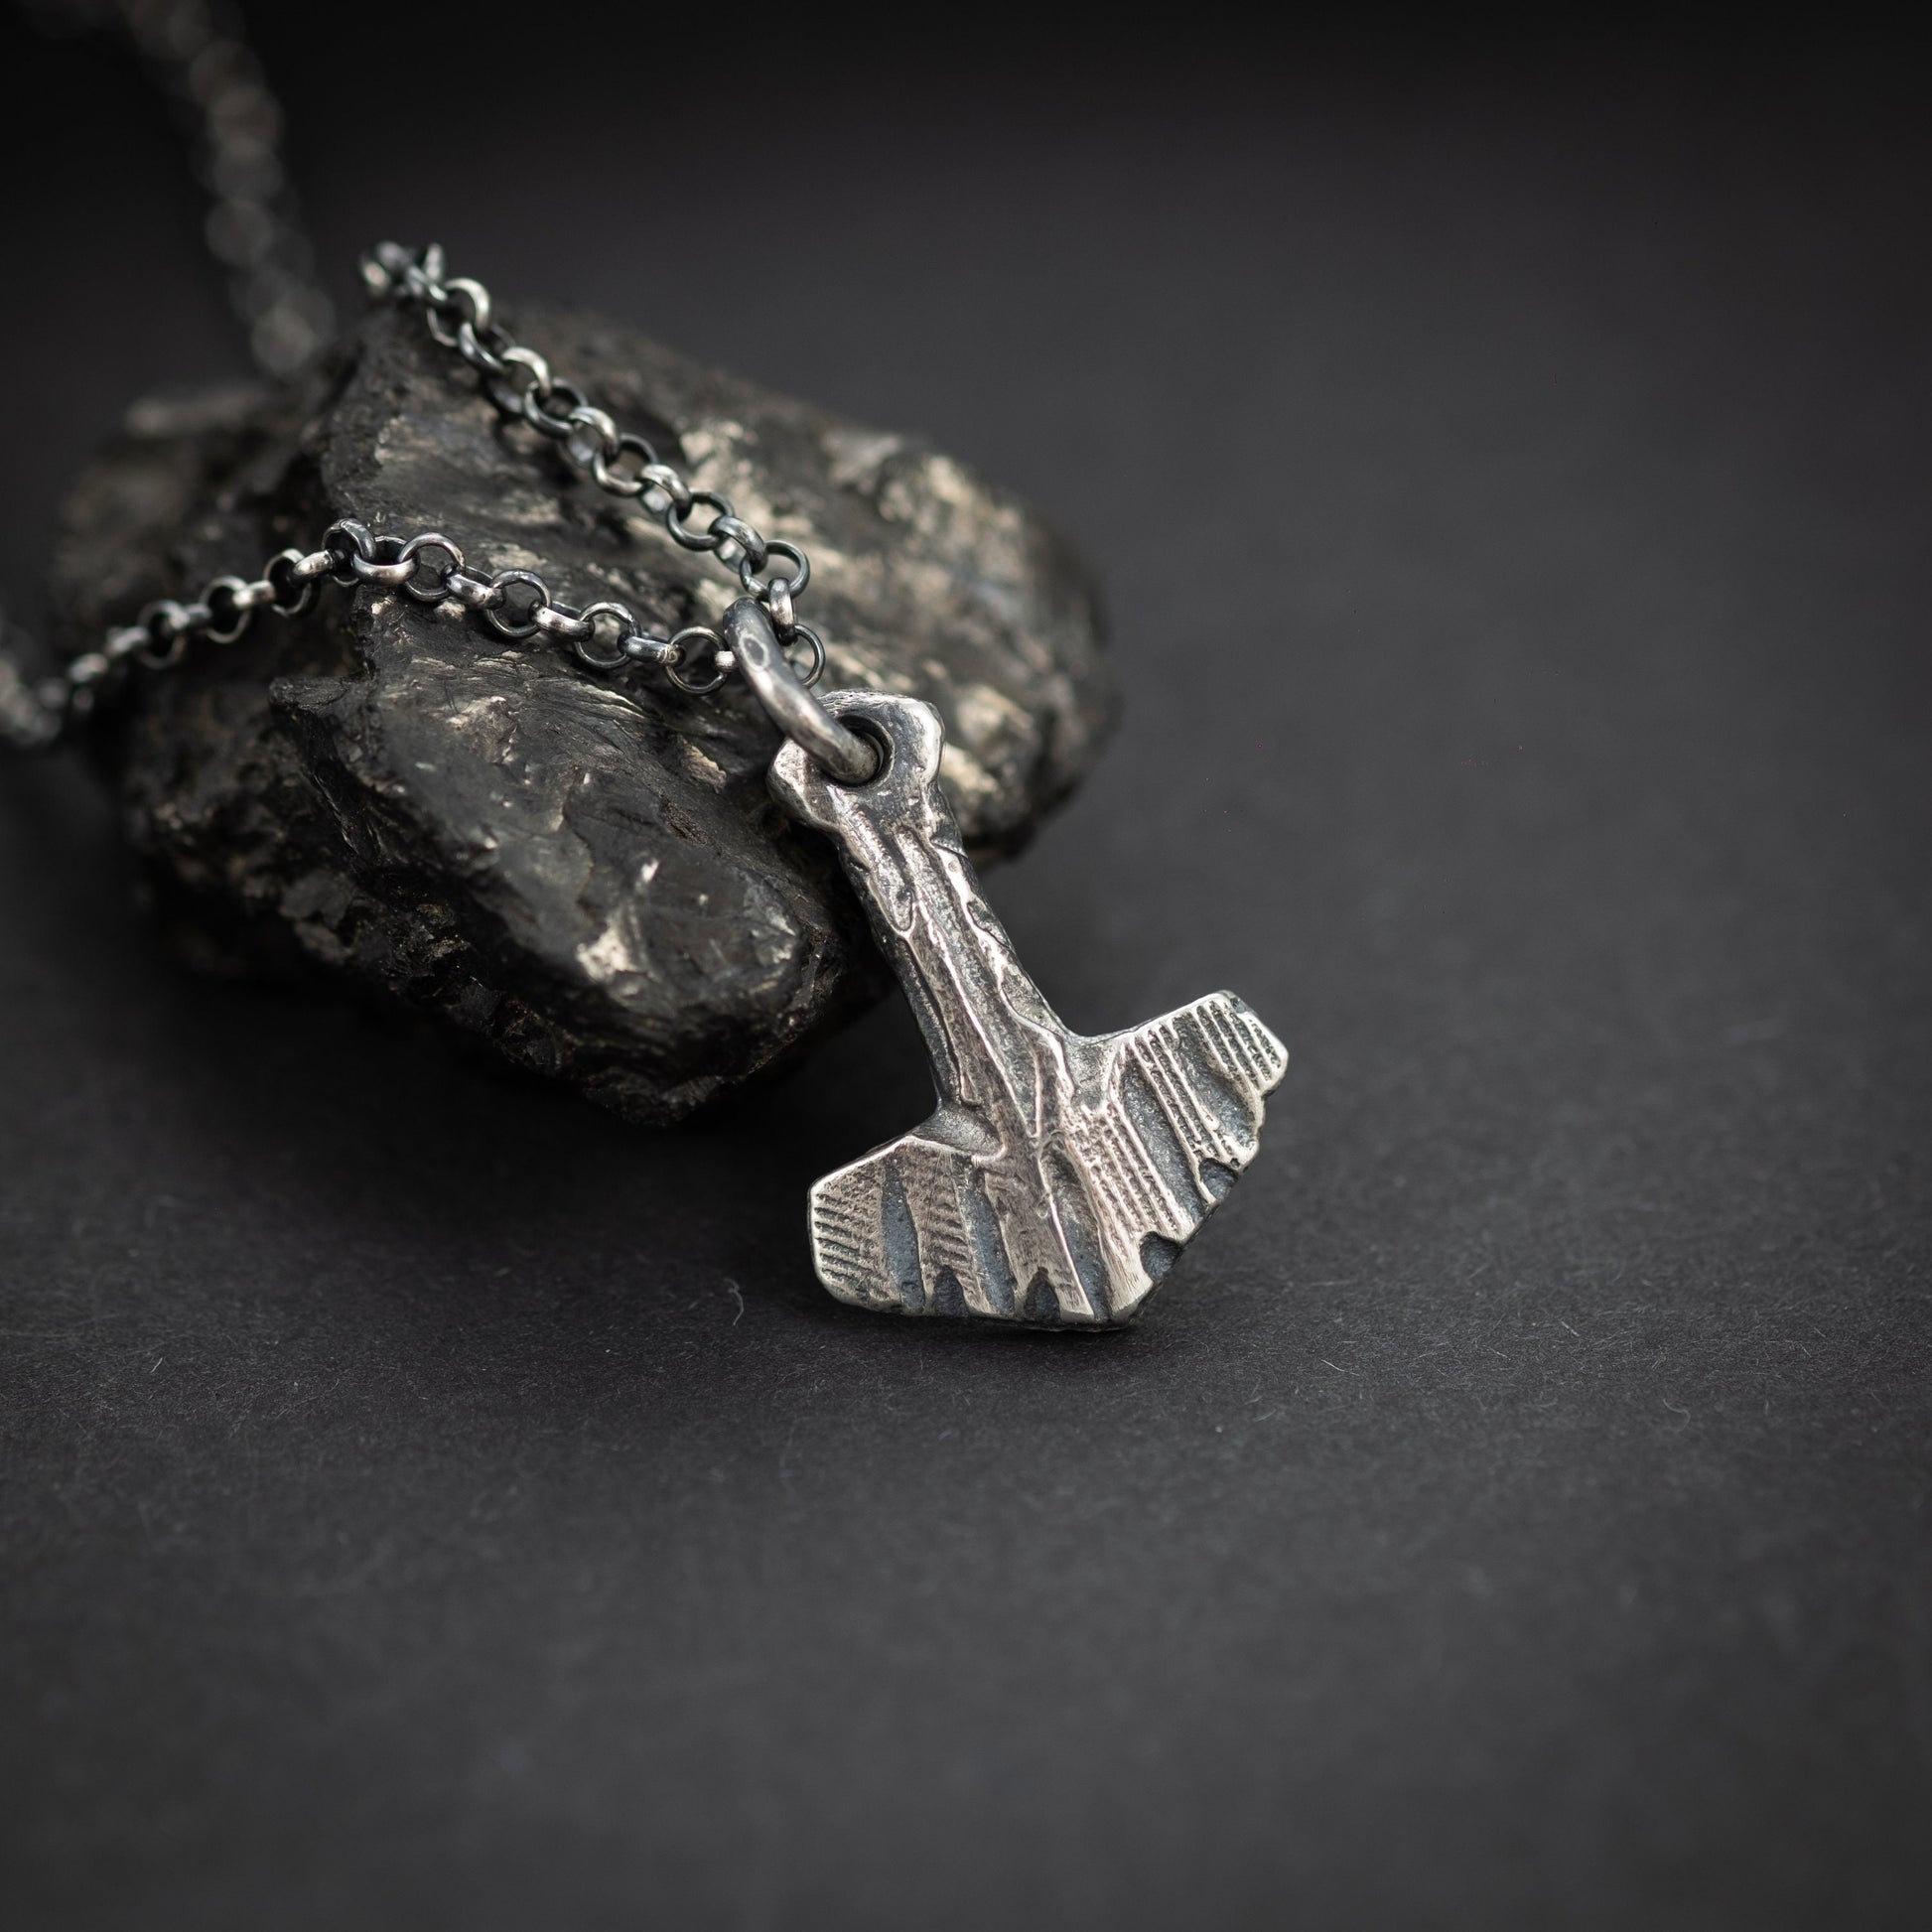 Thors hammer Silver Pendant, Viking jewelry, Mjolnir war hammer necklace, Gift for him, Boyfriend Christmas gifts, Norse jewelry, mens gift